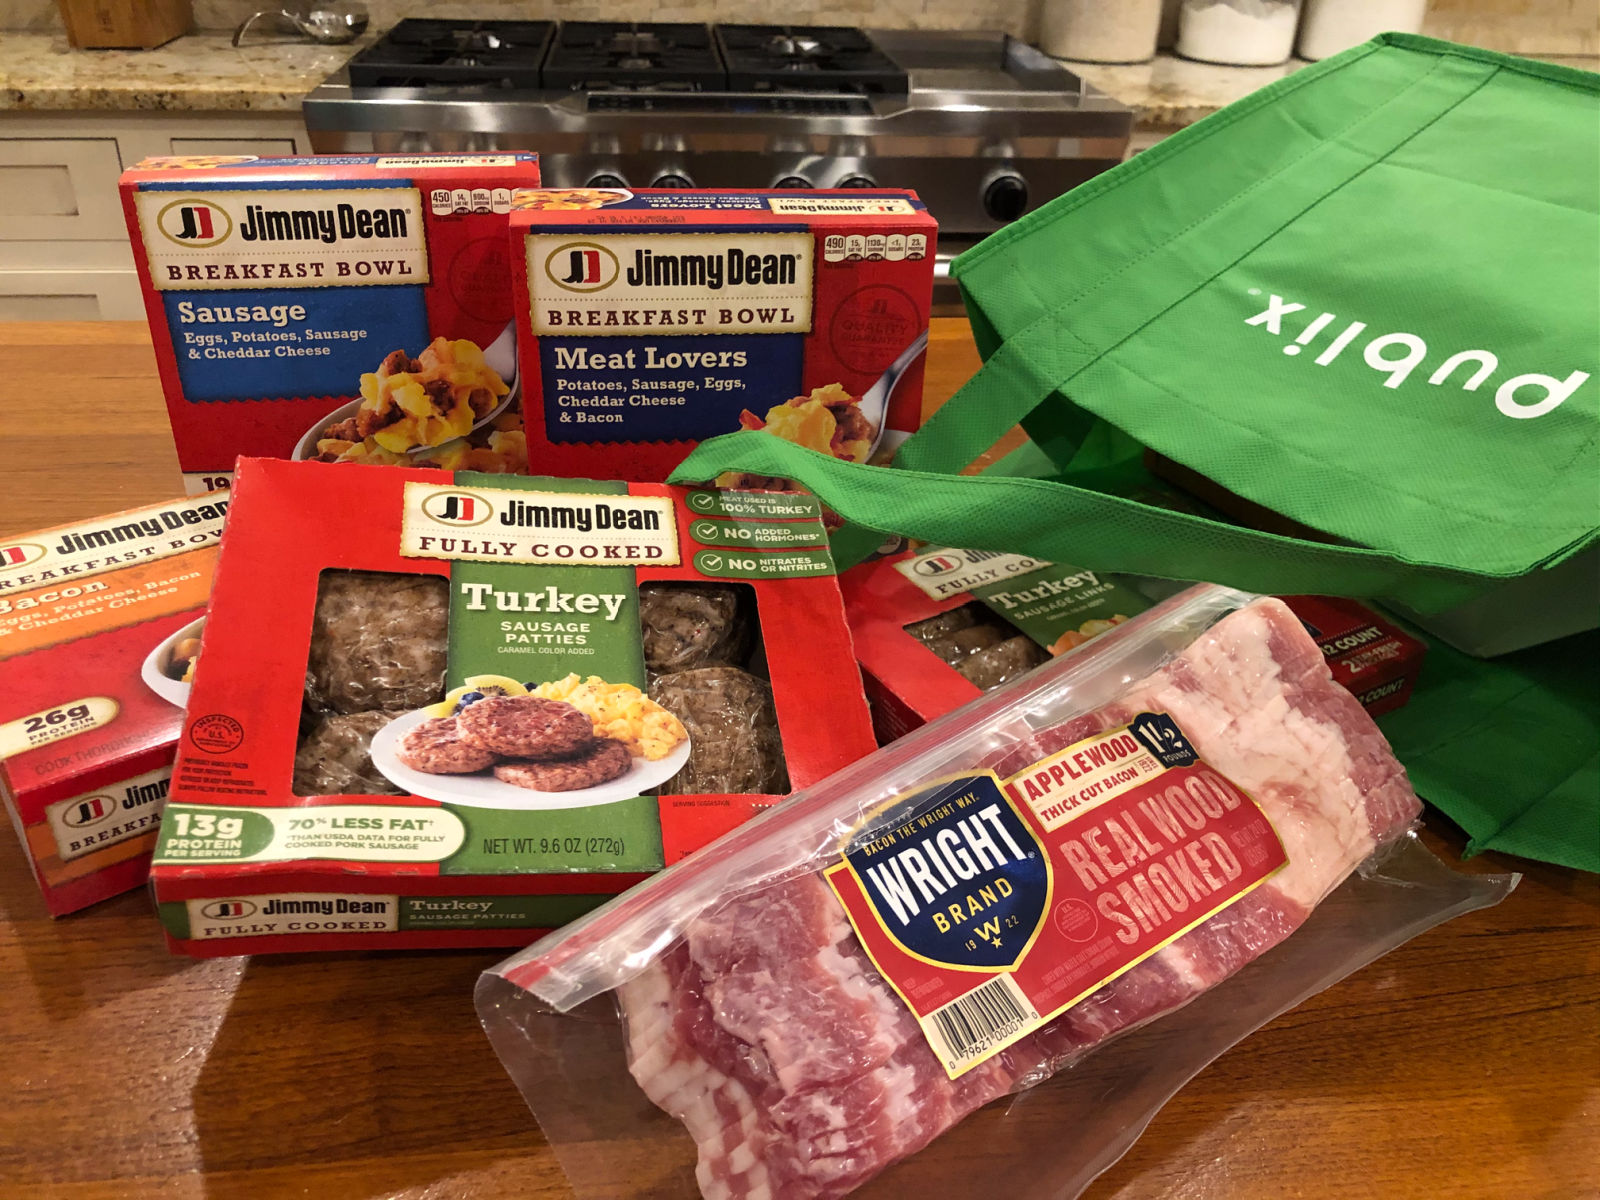 Start Your Day Off Great With Delicious Products From Jimmy Dean & Wright Brand – Find Your Favorites At Publix